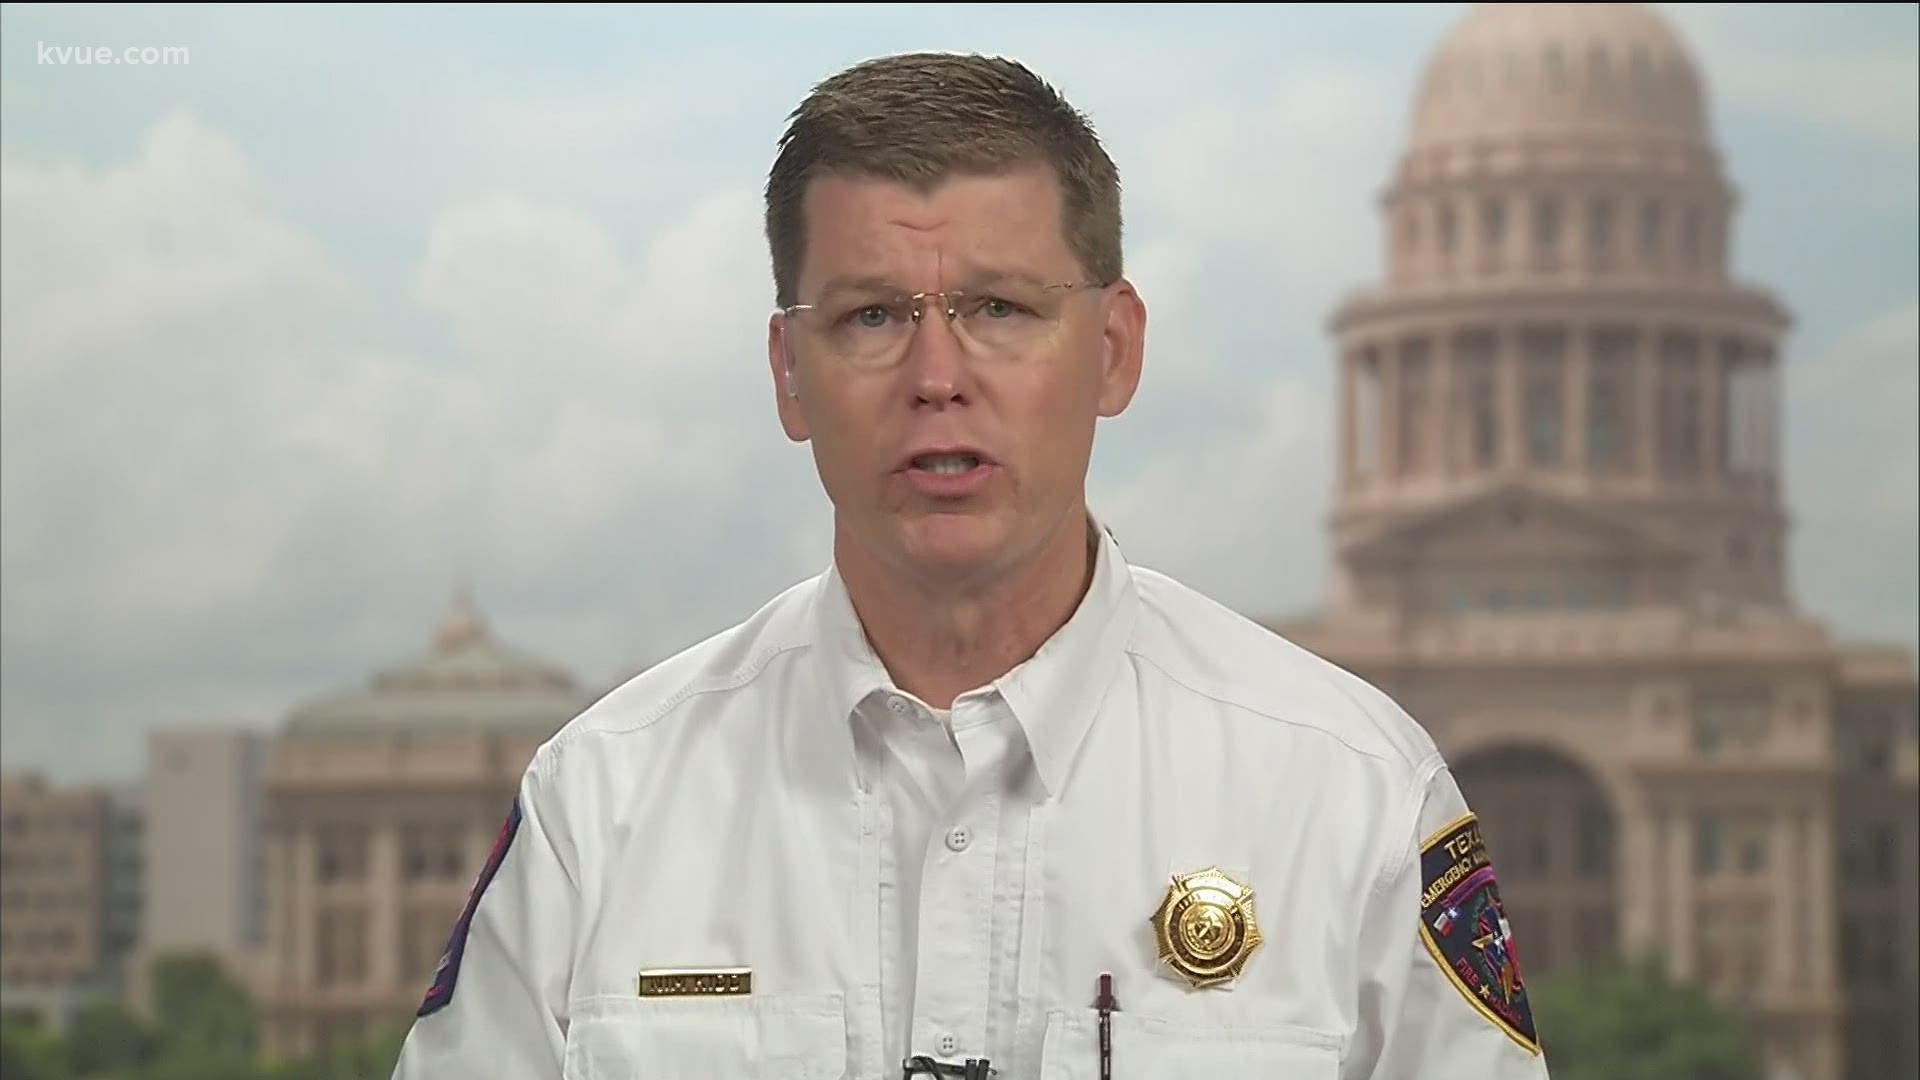 We spoke with the chief of the Texas Division of Emergency Management, Nim Kidd, about the increasing number of COVID-19 cases in Texas.